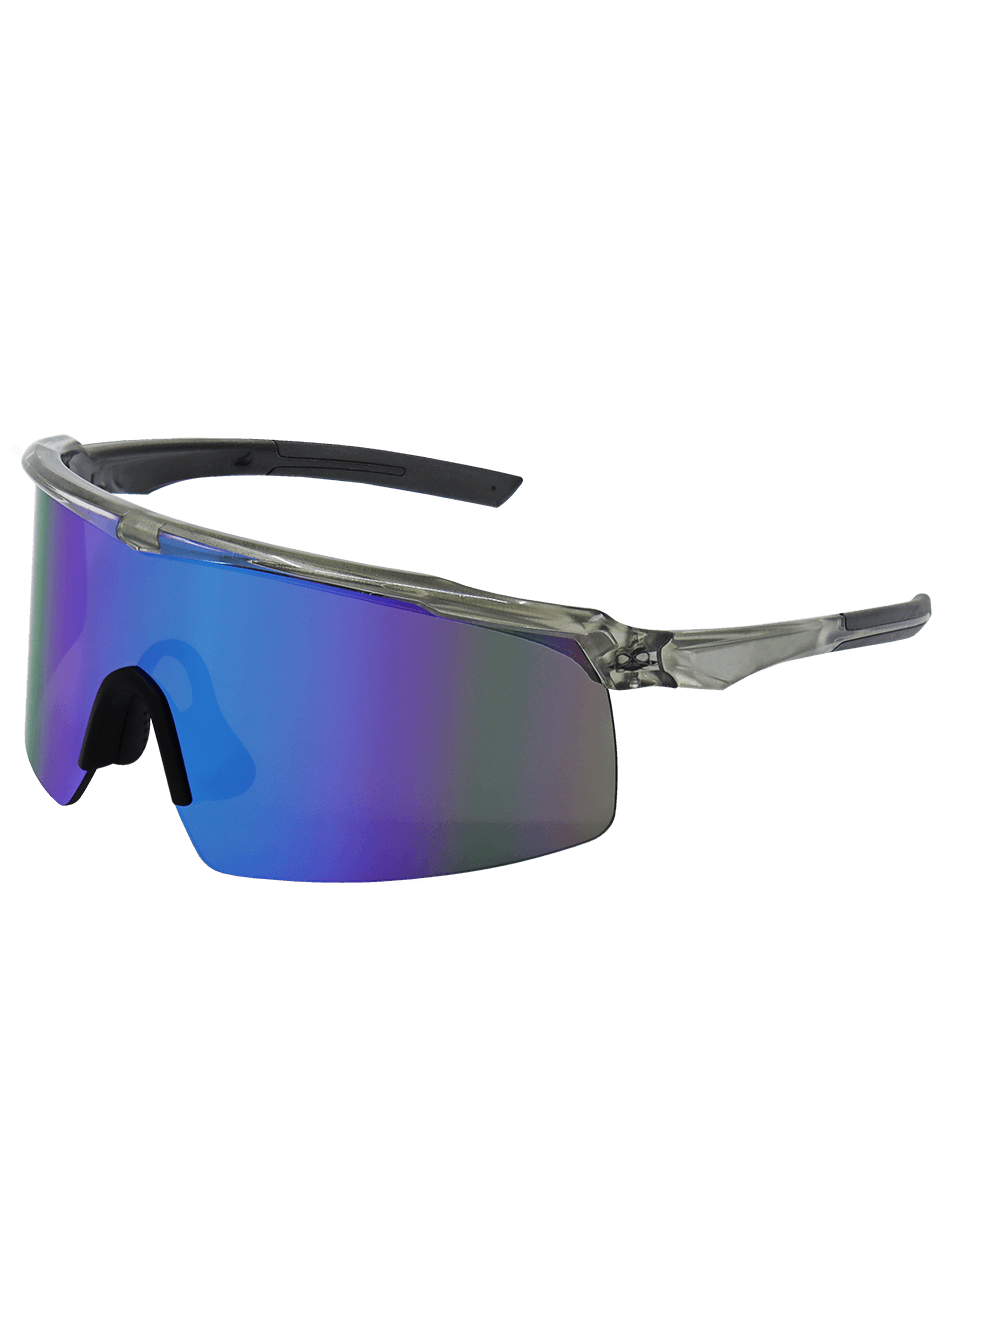 Whipray™ Blue Mirror Performance Fog Technology Polarized Lens, Silver Inlay Frame Safety Glasses - BH3219PFT